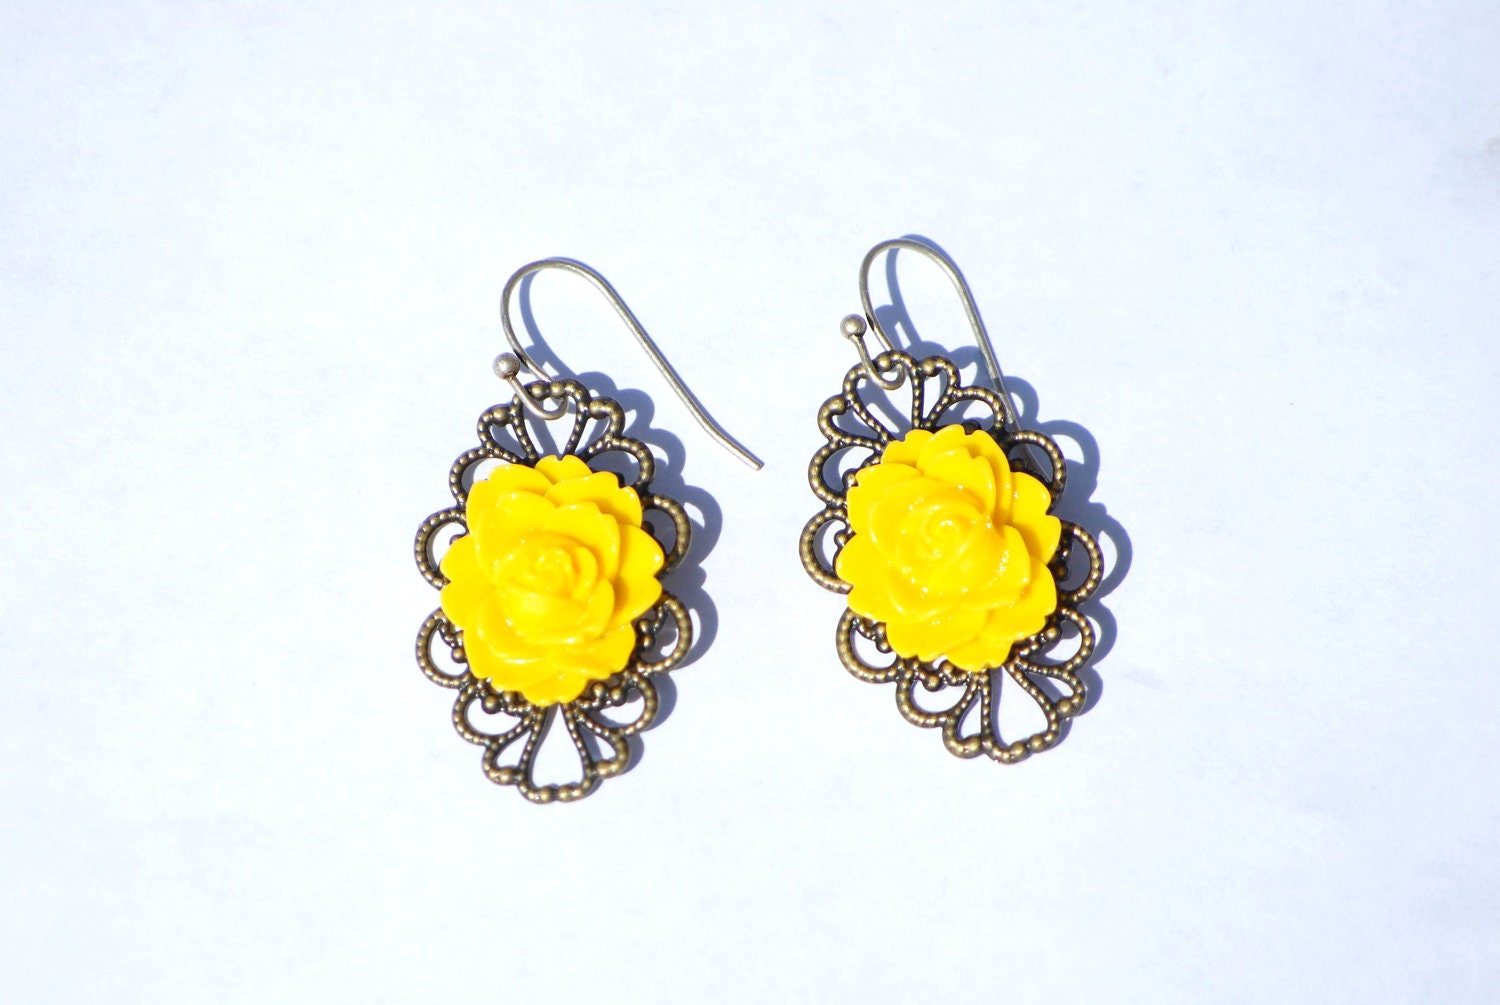 Antiqued Bronze Earrings with yellow resin flower